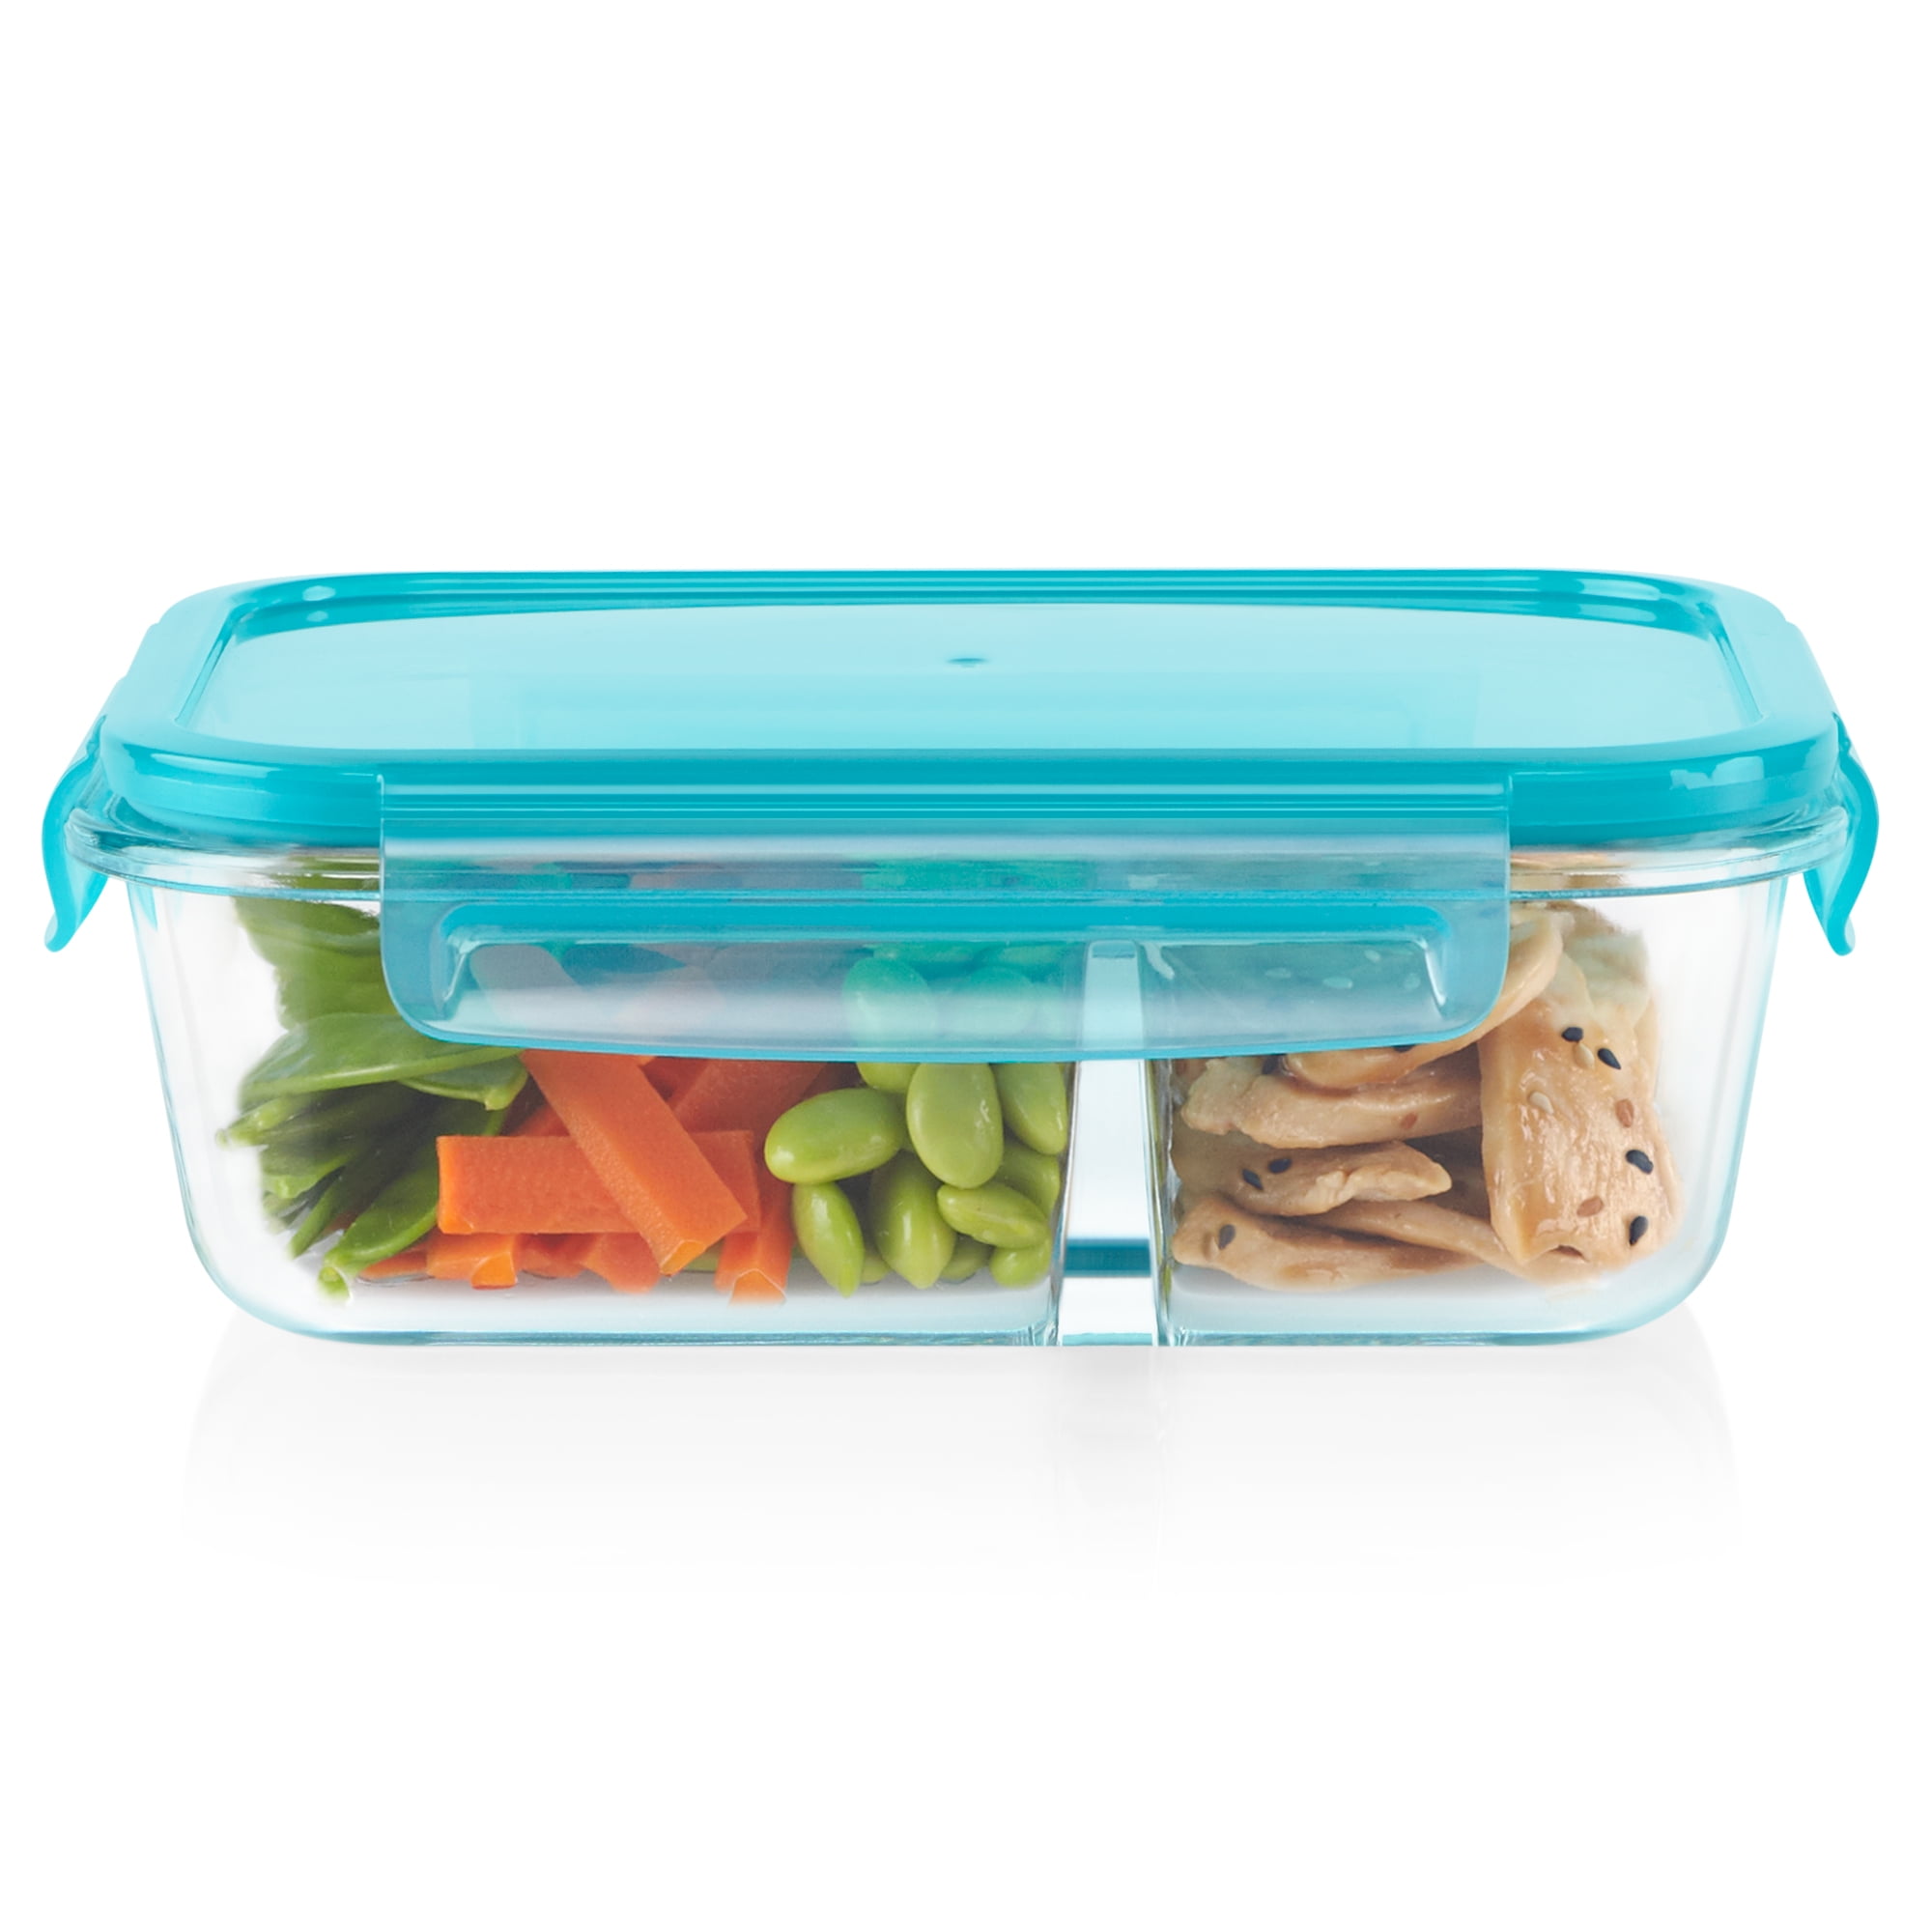 High Quality 400ml pyrex glass lunch food container